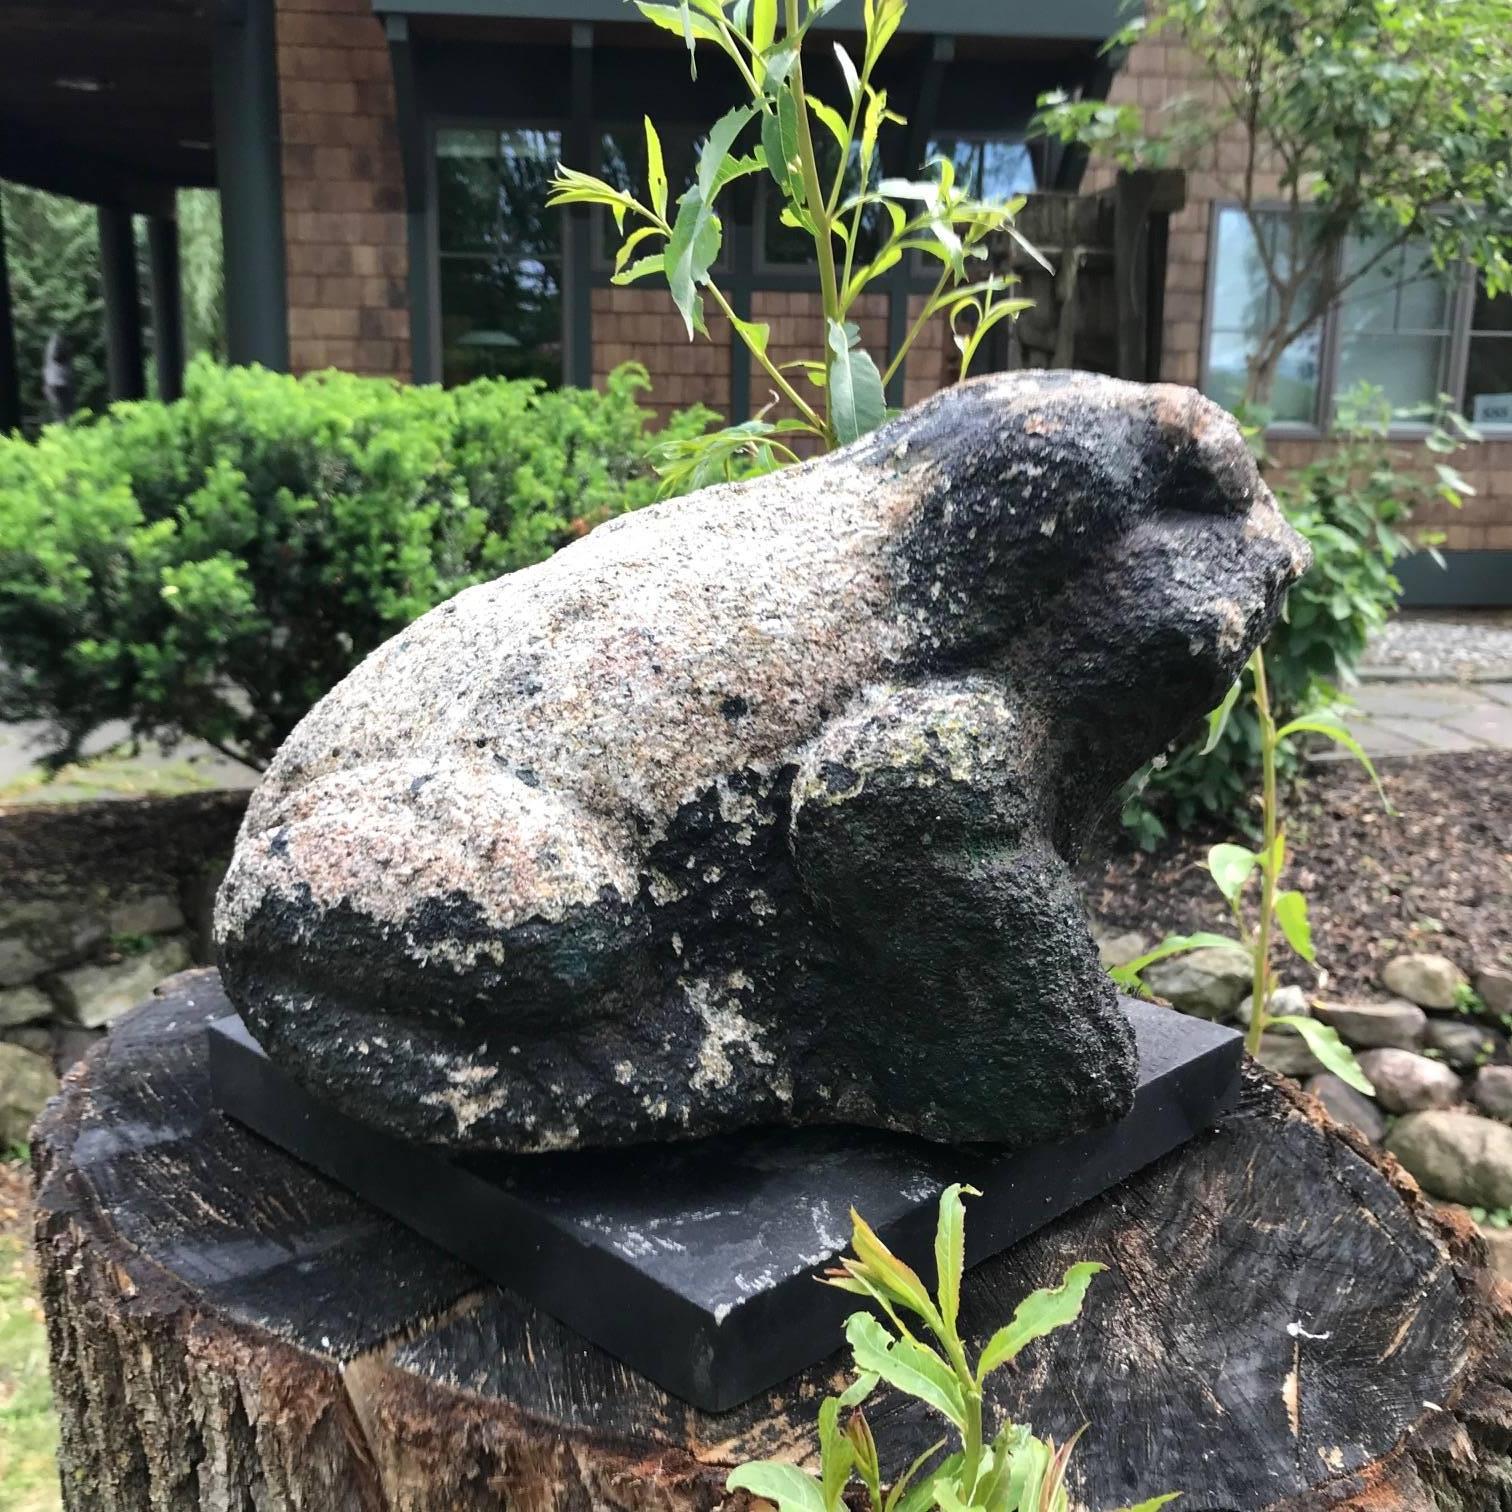 20th Century Giant Burly Japanese Antique Stone Frog Found In Vermont Tree, 17